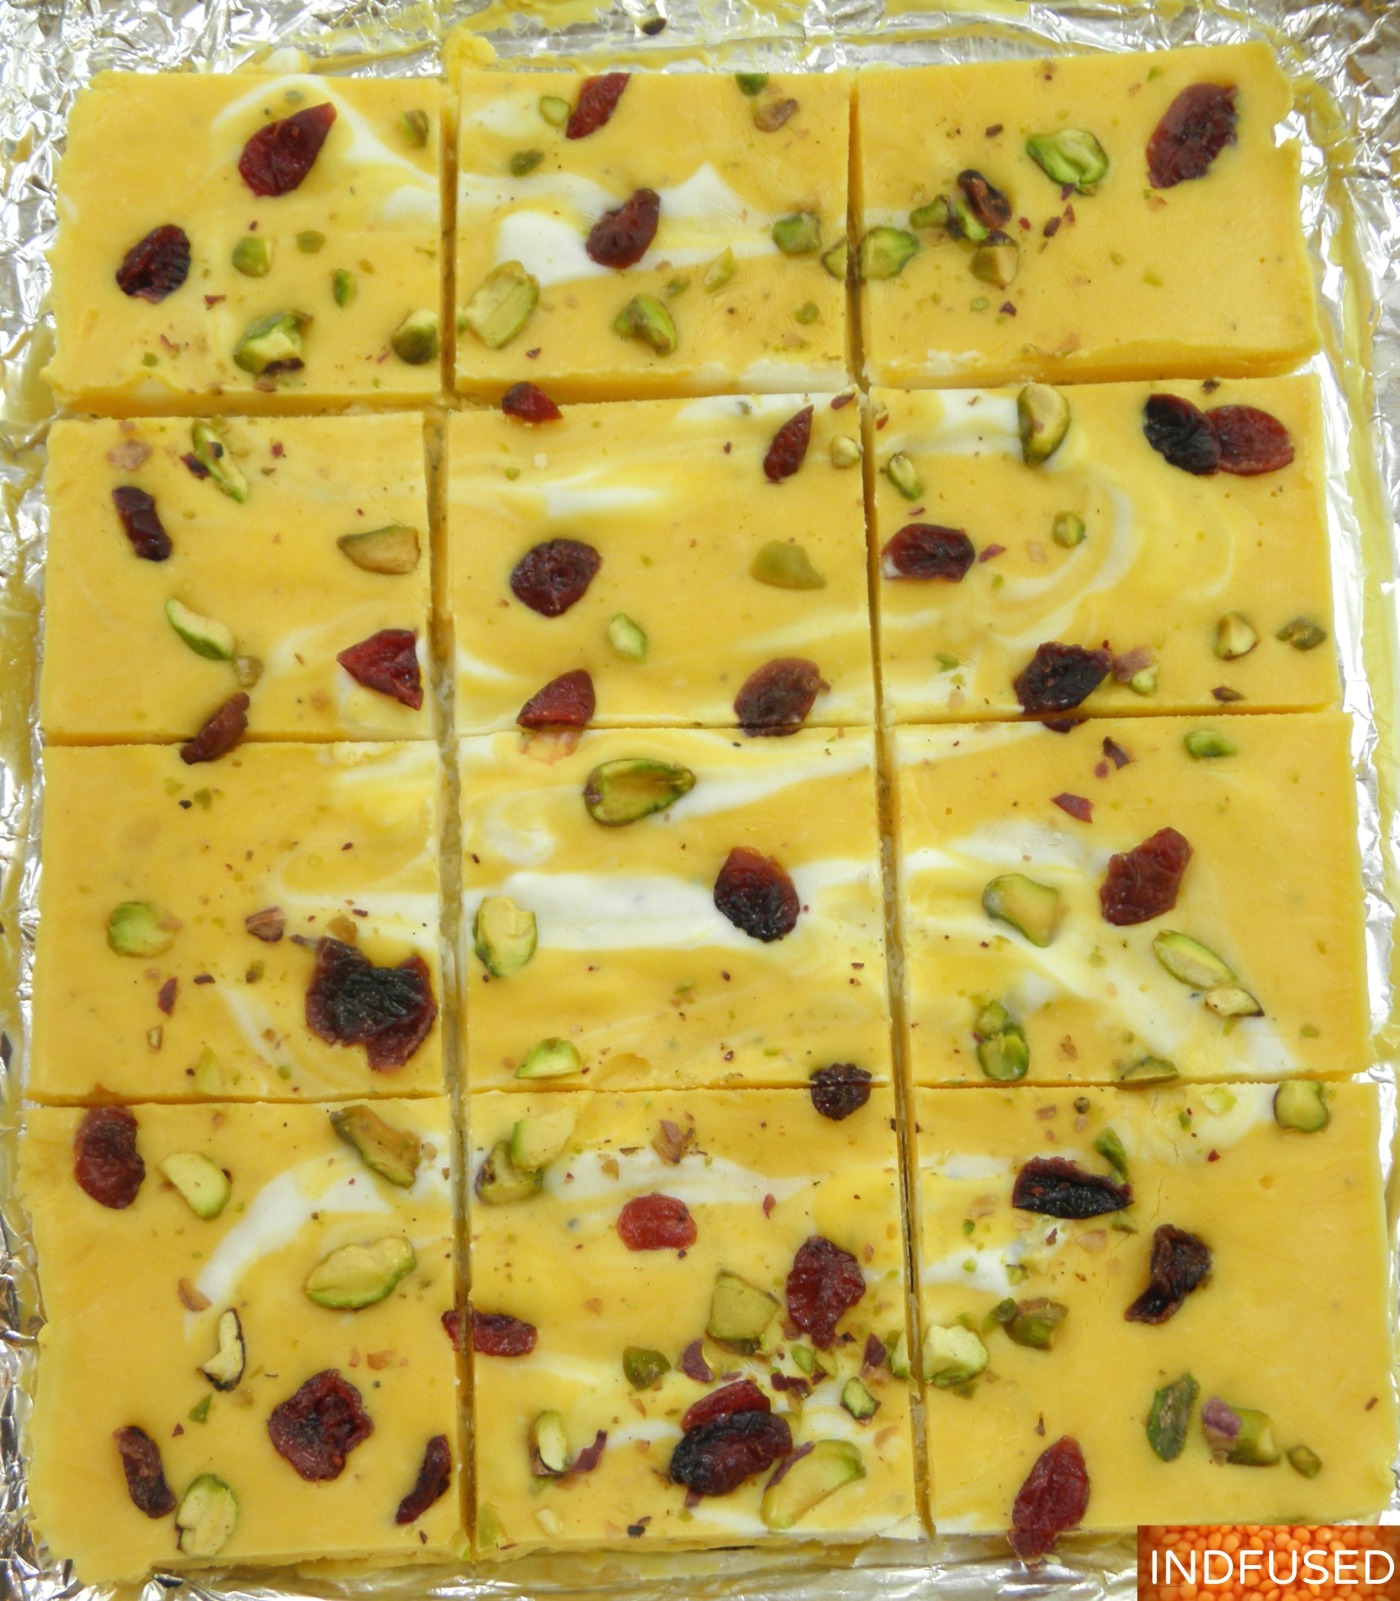 Quick and easy recipe for the perfect summer dessert! A nectarous dessert made with Greek yogurt, mango, pistachios and craisins and scented with cardamom.